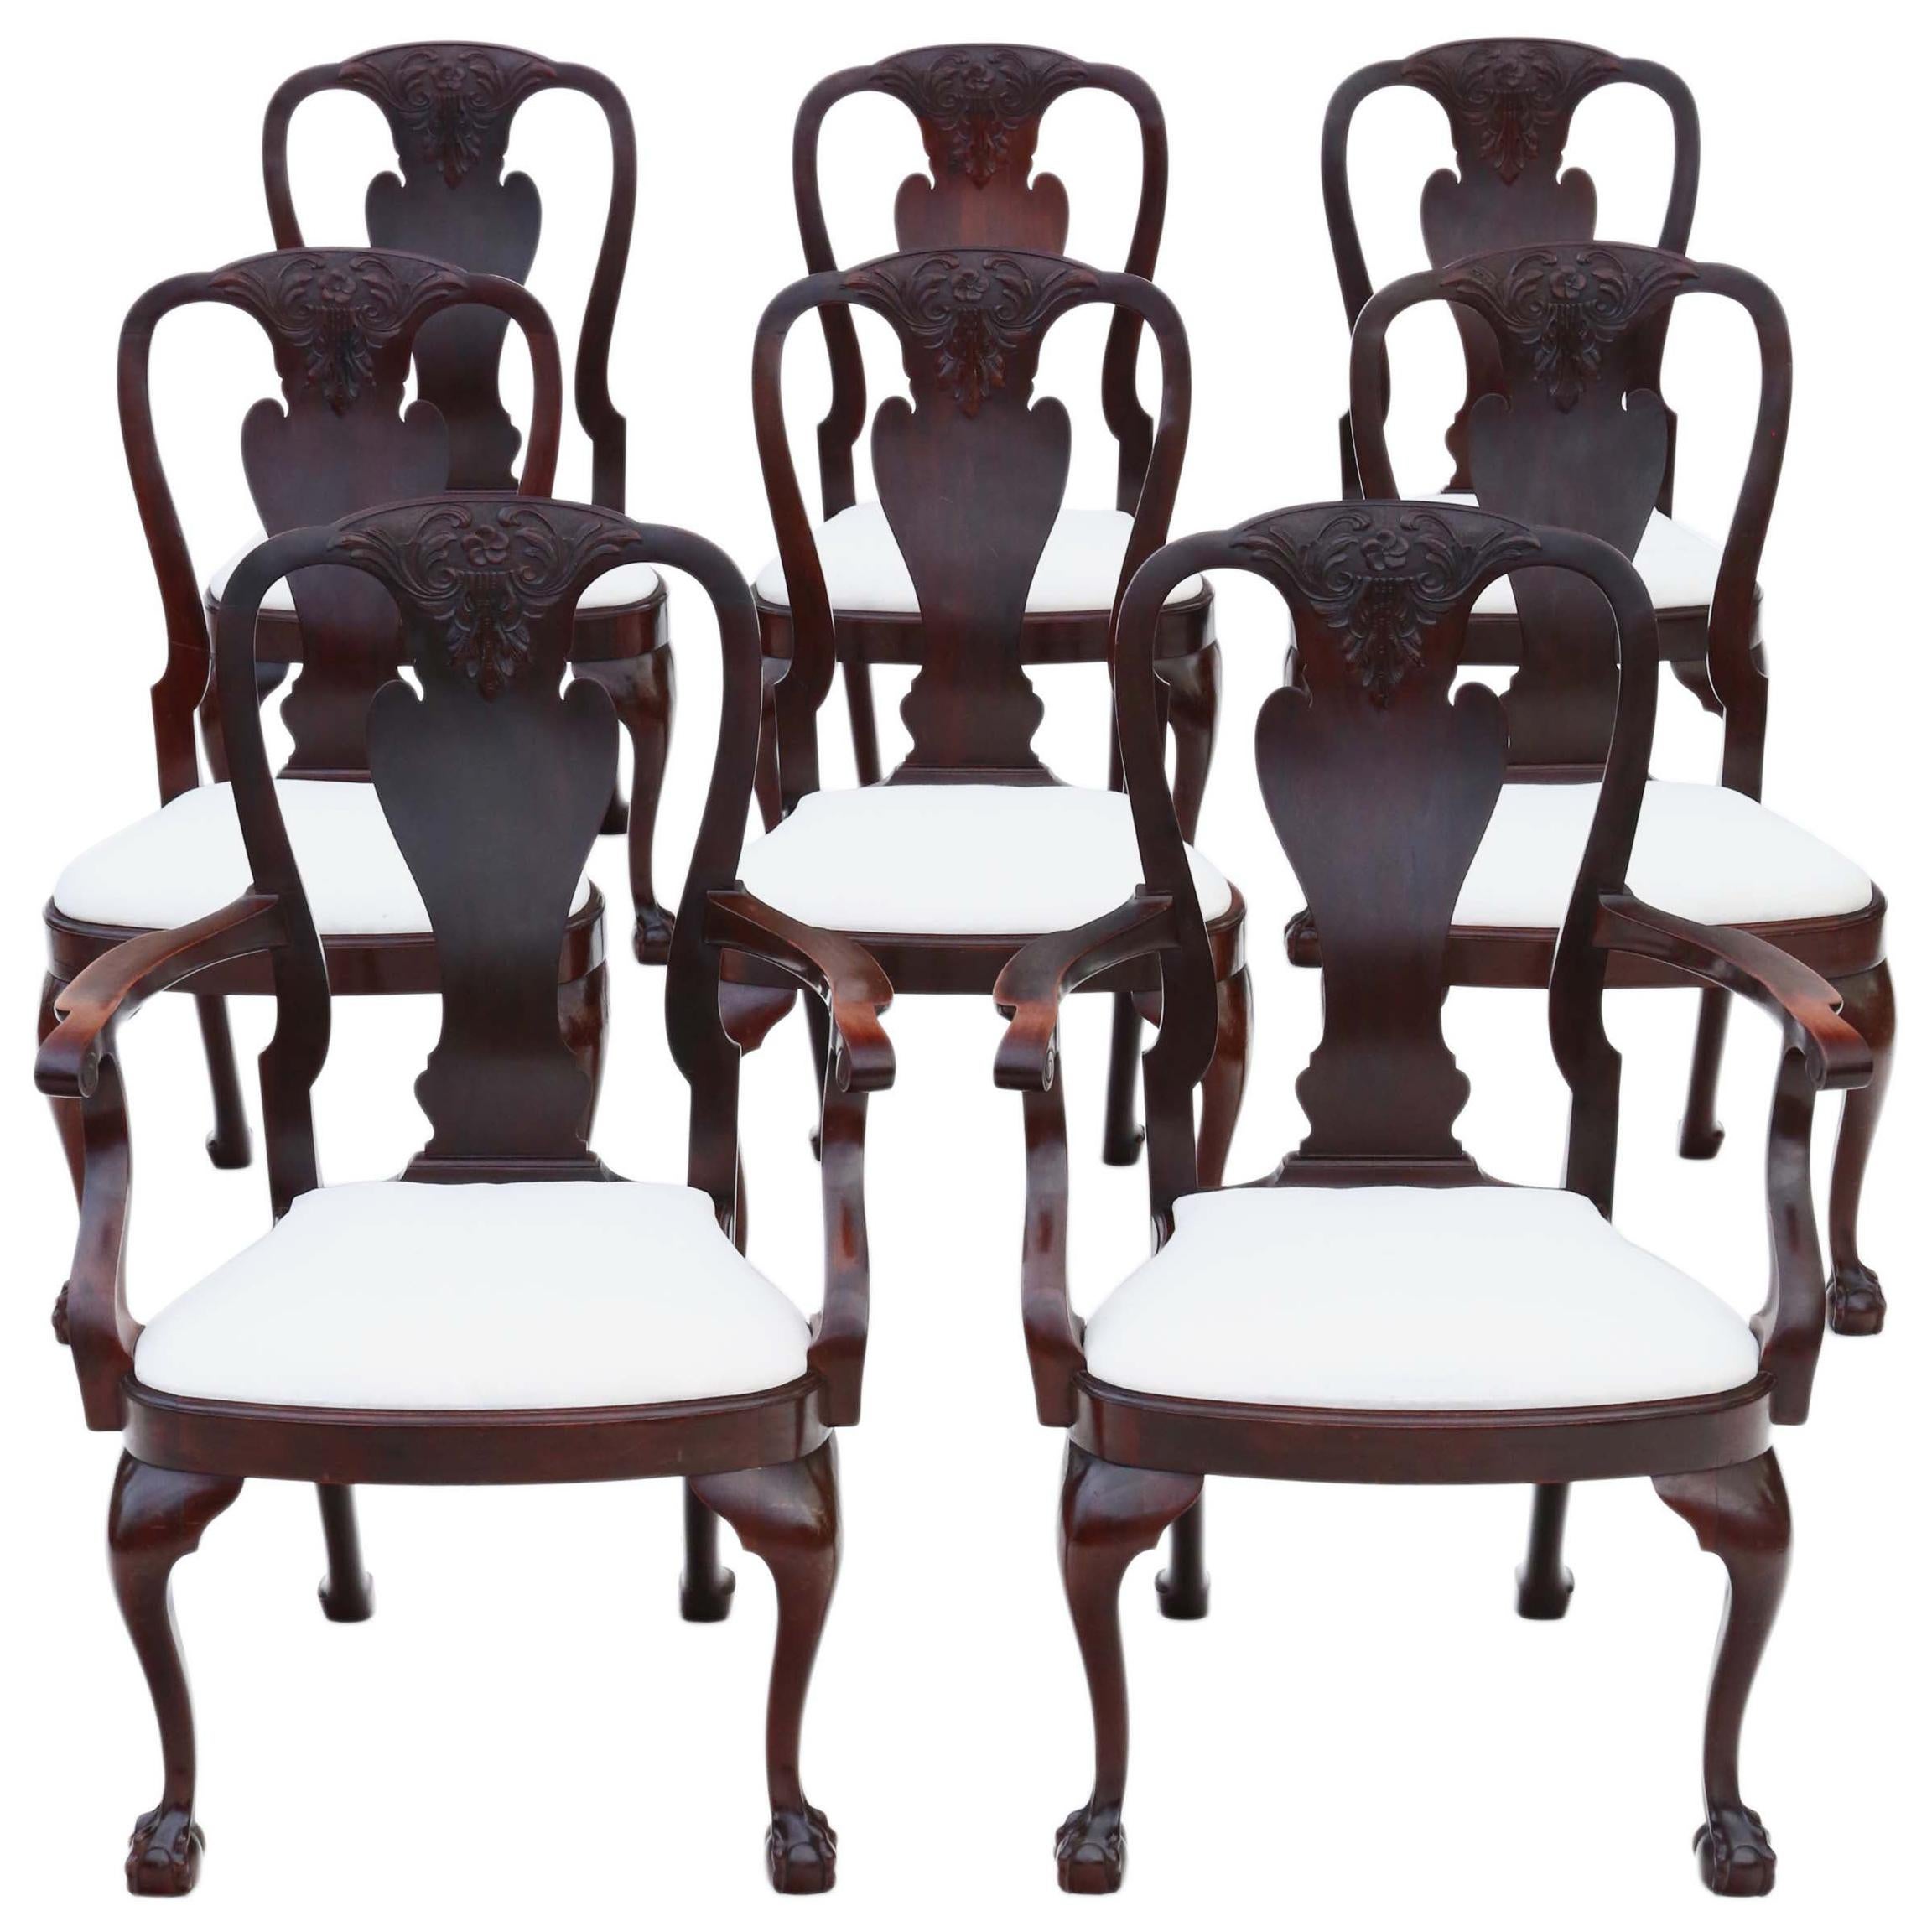 Antique Set of 8 '6+2' Carved Mahogany Dining Chairs Queen Anne Revival